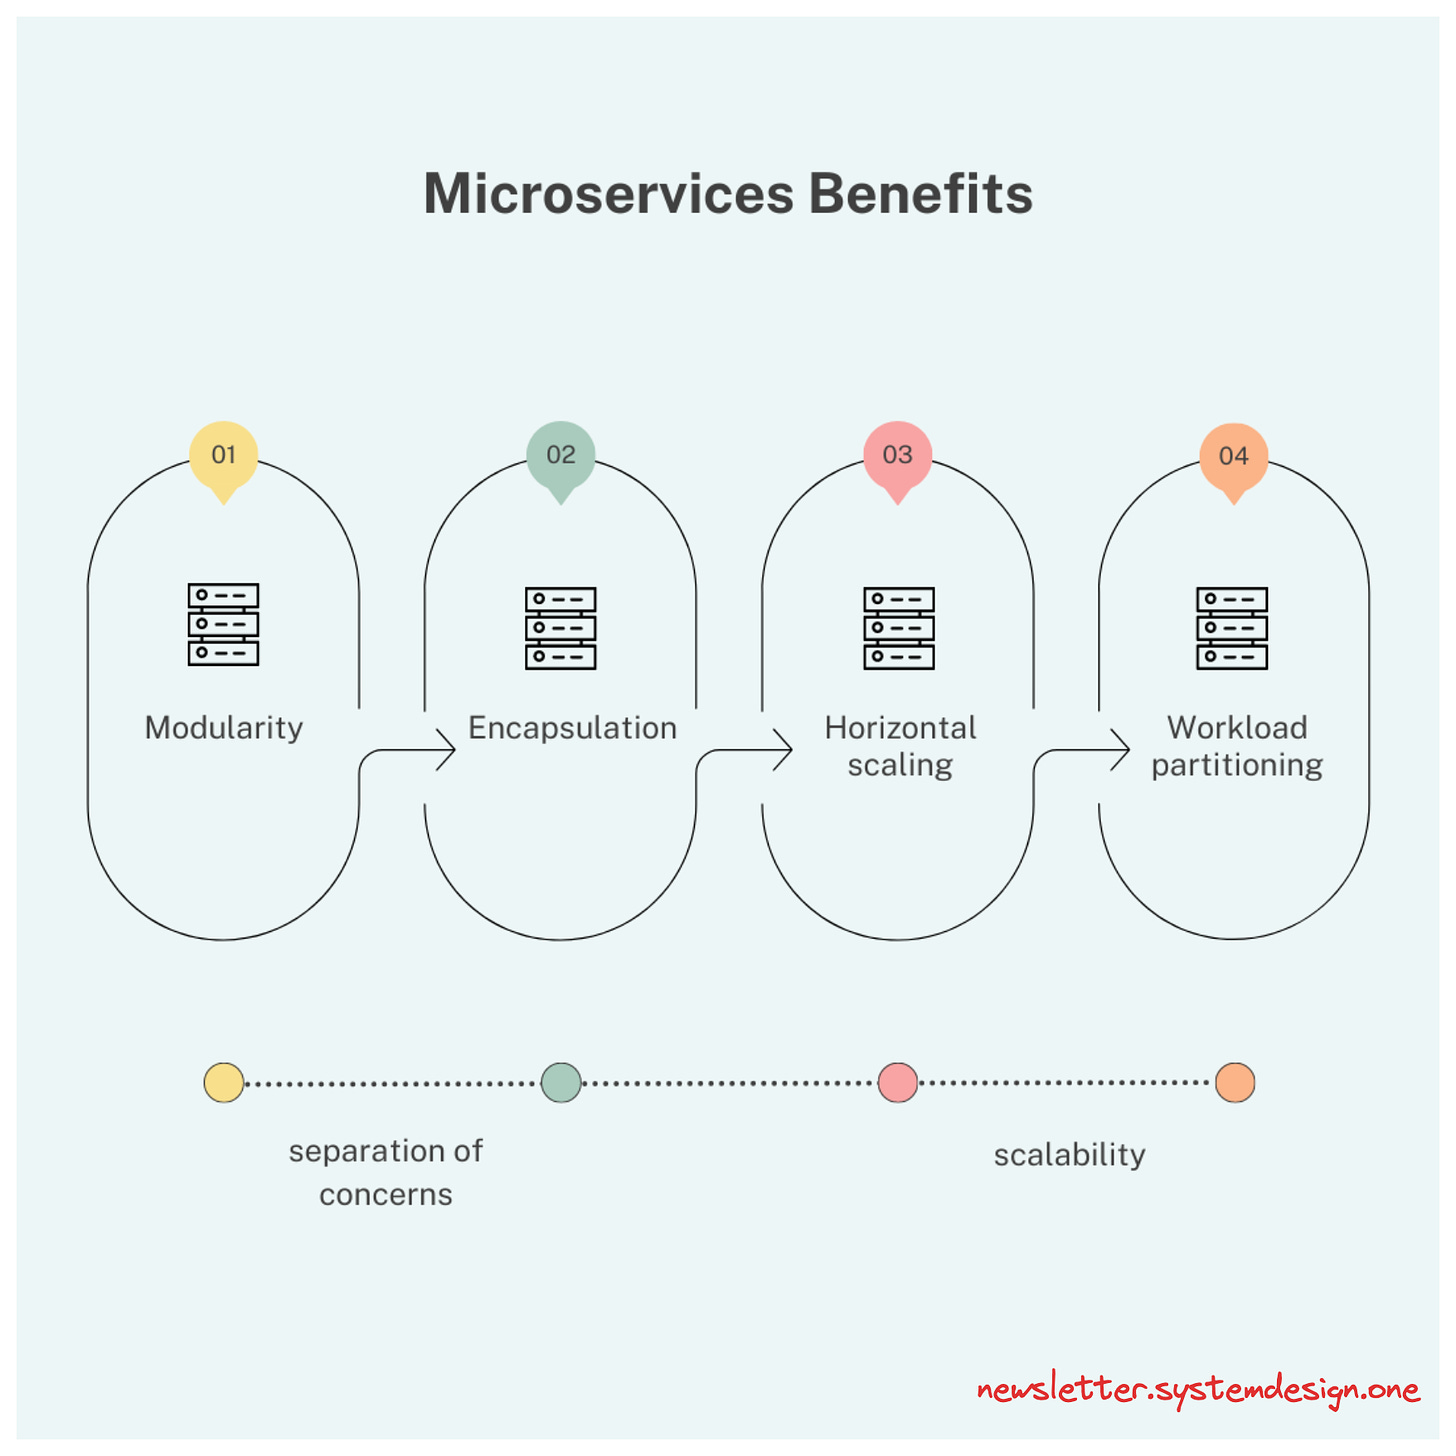 Netflix microservices; Microservices benefits